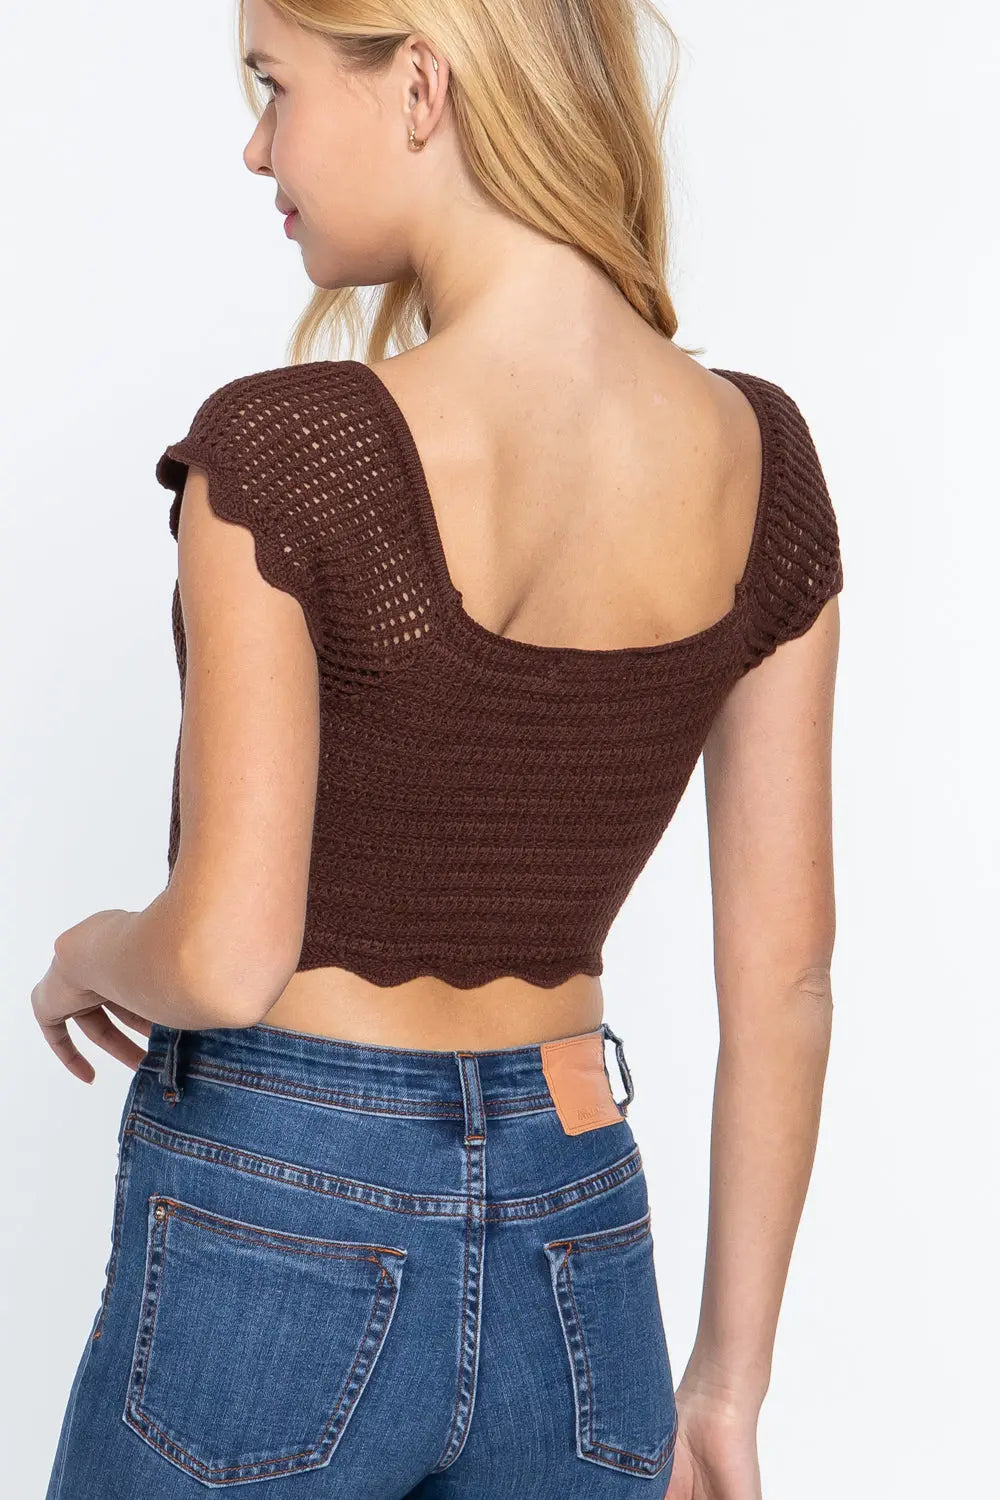 Short Sleeve V-neck Front Knot Detail Sweater Knit Crop Top Sunny EvE Fashion